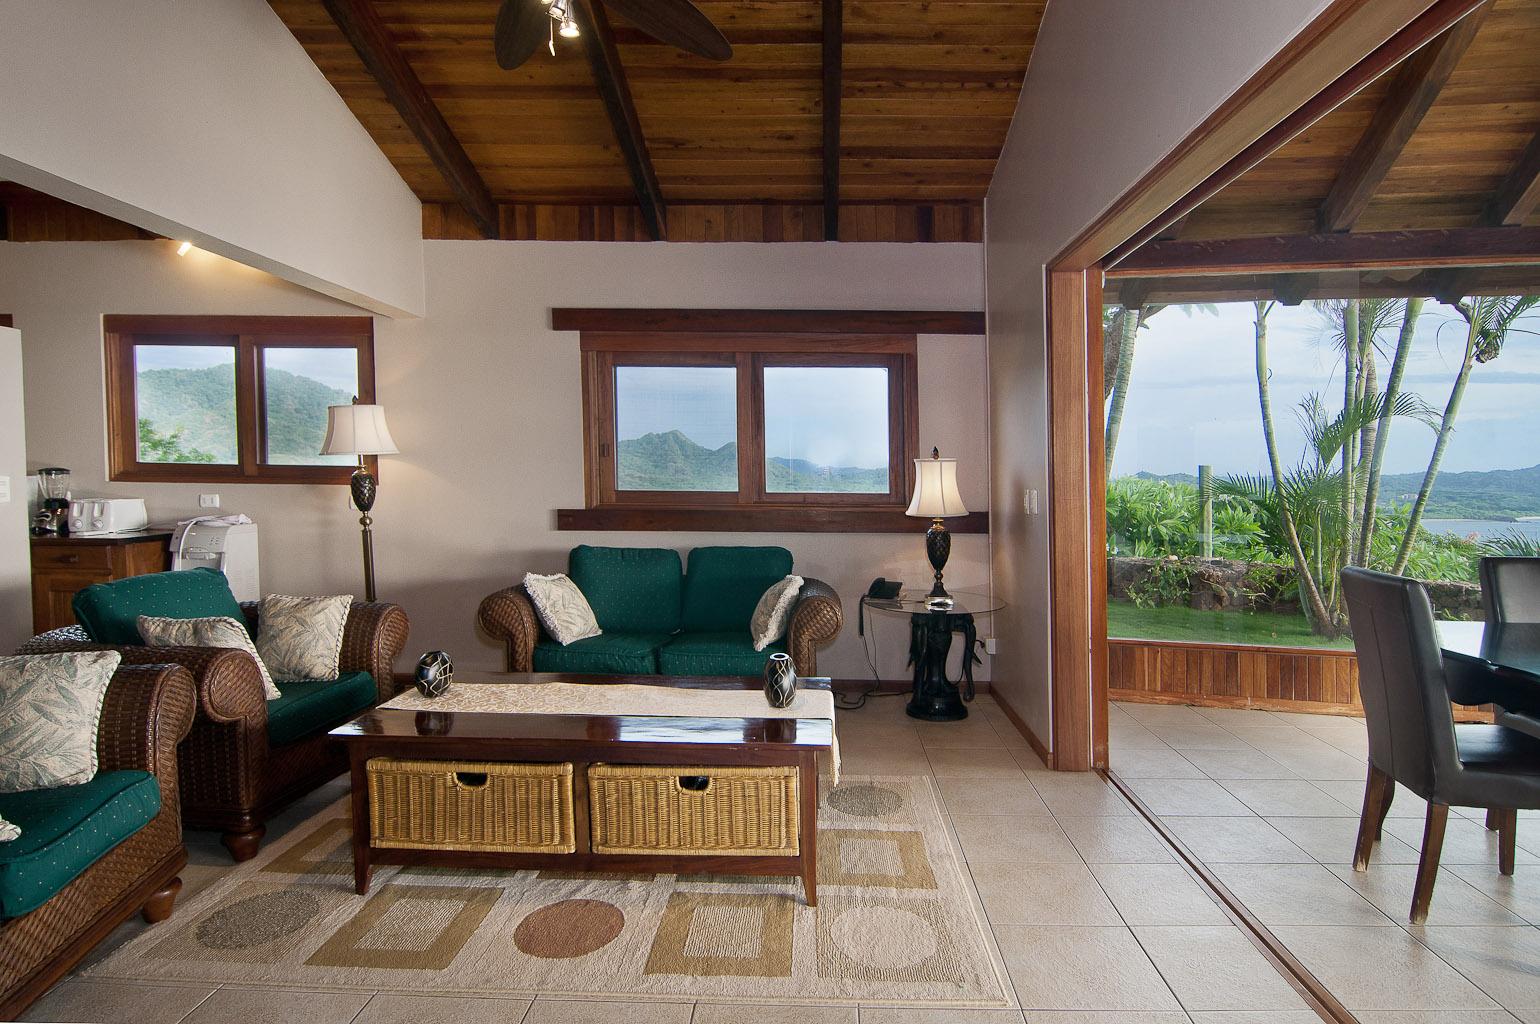 What You Need to Know About Renting in Costa Rica